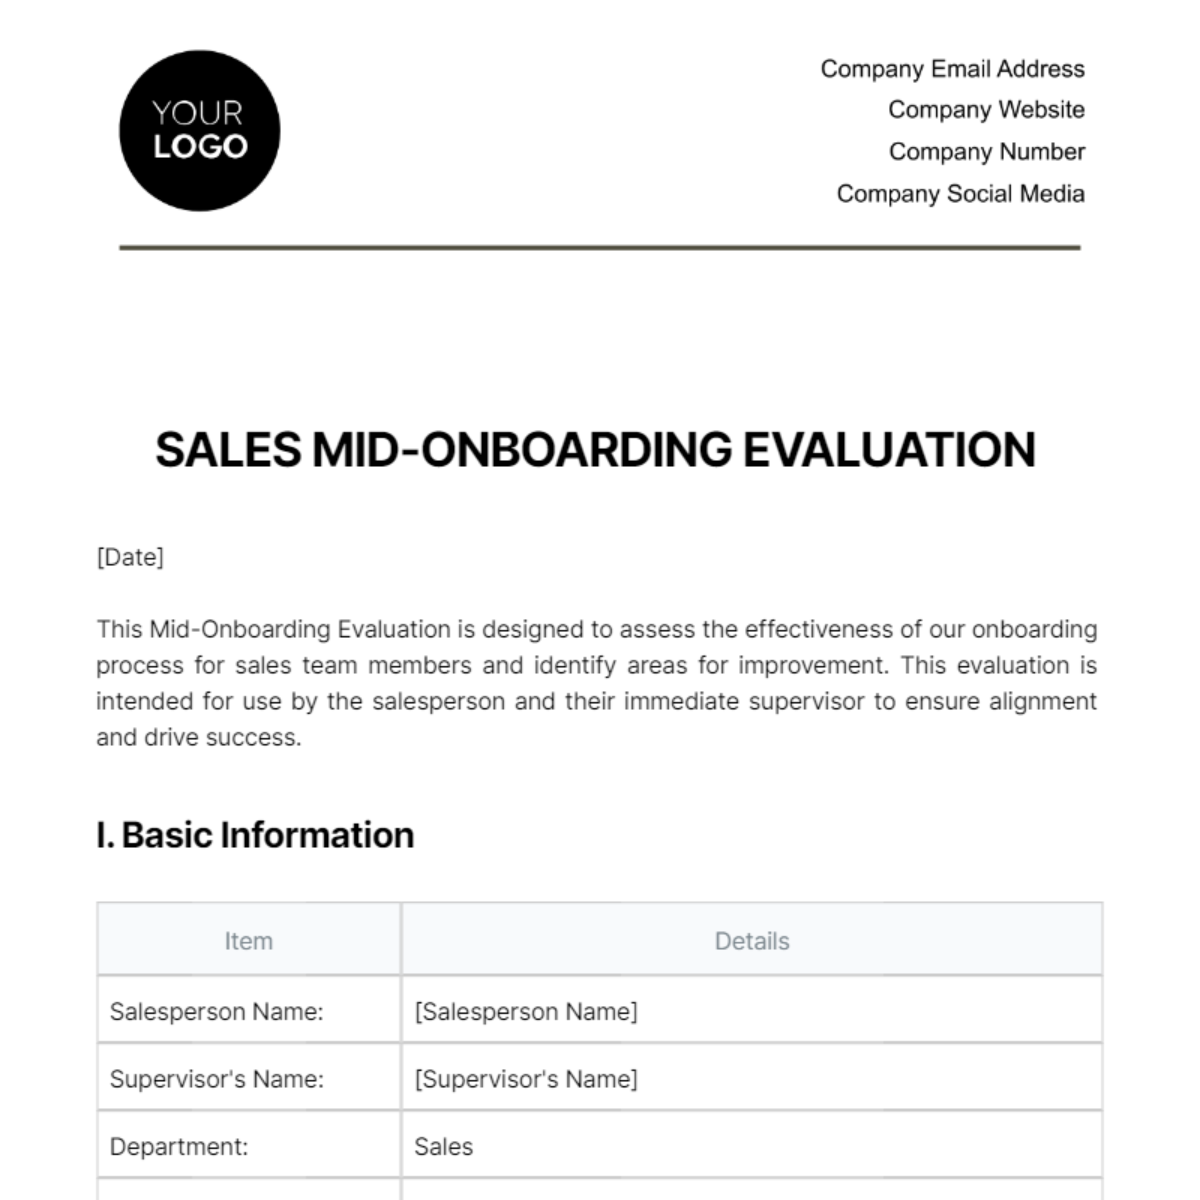 Sales Mid-Onboarding Evaluation Template